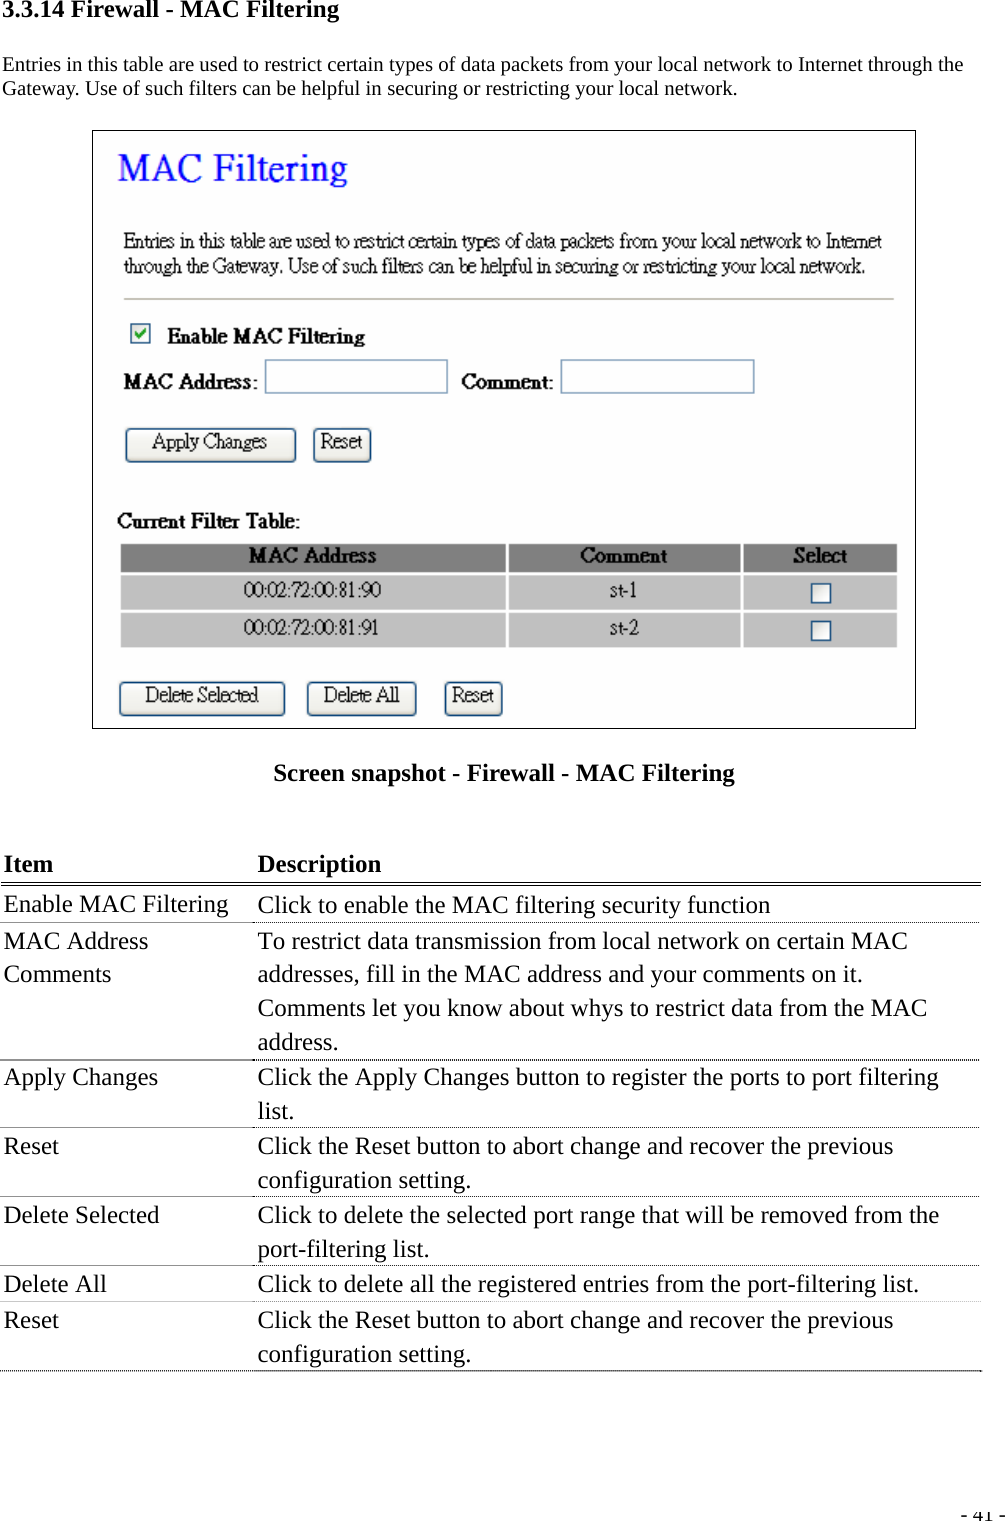 3.3.14 Firewall - MAC Filtering Entries in this table are used to restrict certain types of data packets from your local network to Internet through the Gateway. Use of such filters can be helpful in securing or restricting your local network.  Screen snapshot - Firewall - MAC Filtering  Item Description Enable MAC Filtering    Click to enable the MAC filtering security function MAC Address Comments  To restrict data transmission from local network on certain MAC addresses, fill in the MAC address and your comments on it. Comments let you know about whys to restrict data from the MAC address. Apply Changes  Click the Apply Changes button to register the ports to port filtering list. Reset  Click the Reset button to abort change and recover the previous configuration setting. Delete Selected  Click to delete the selected port range that will be removed from the port-filtering list. Delete All  Click to delete all the registered entries from the port-filtering list. Reset  Click the Reset button to abort change and recover the previous configuration setting.   - 41 - 